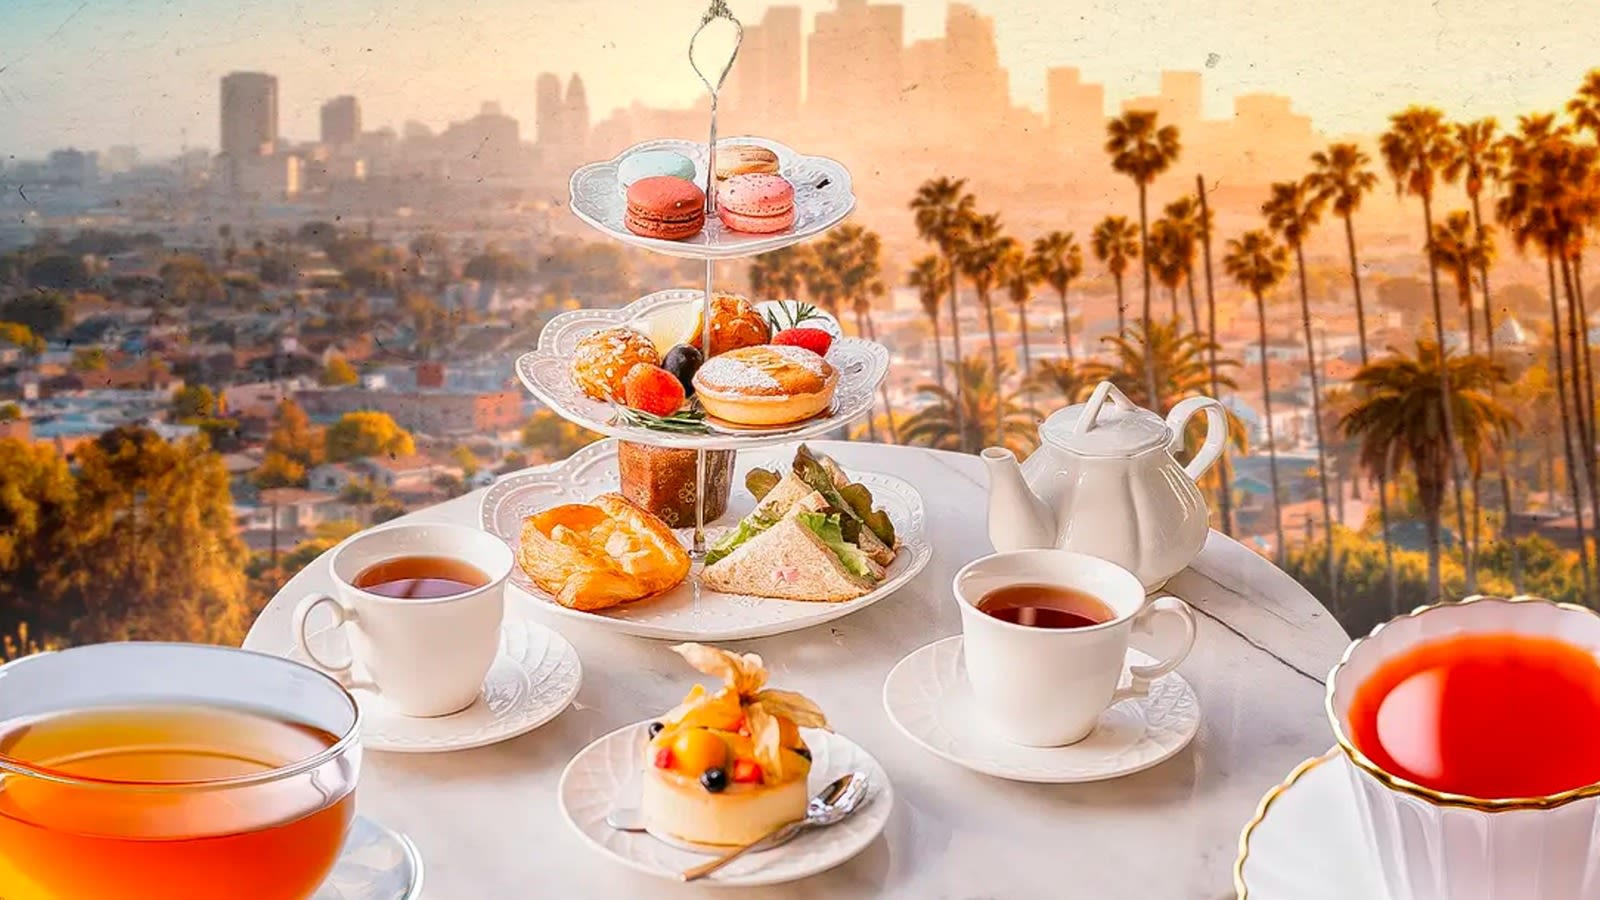 The 15 Best Afternoon Teas In Los Angeles, According To A Local